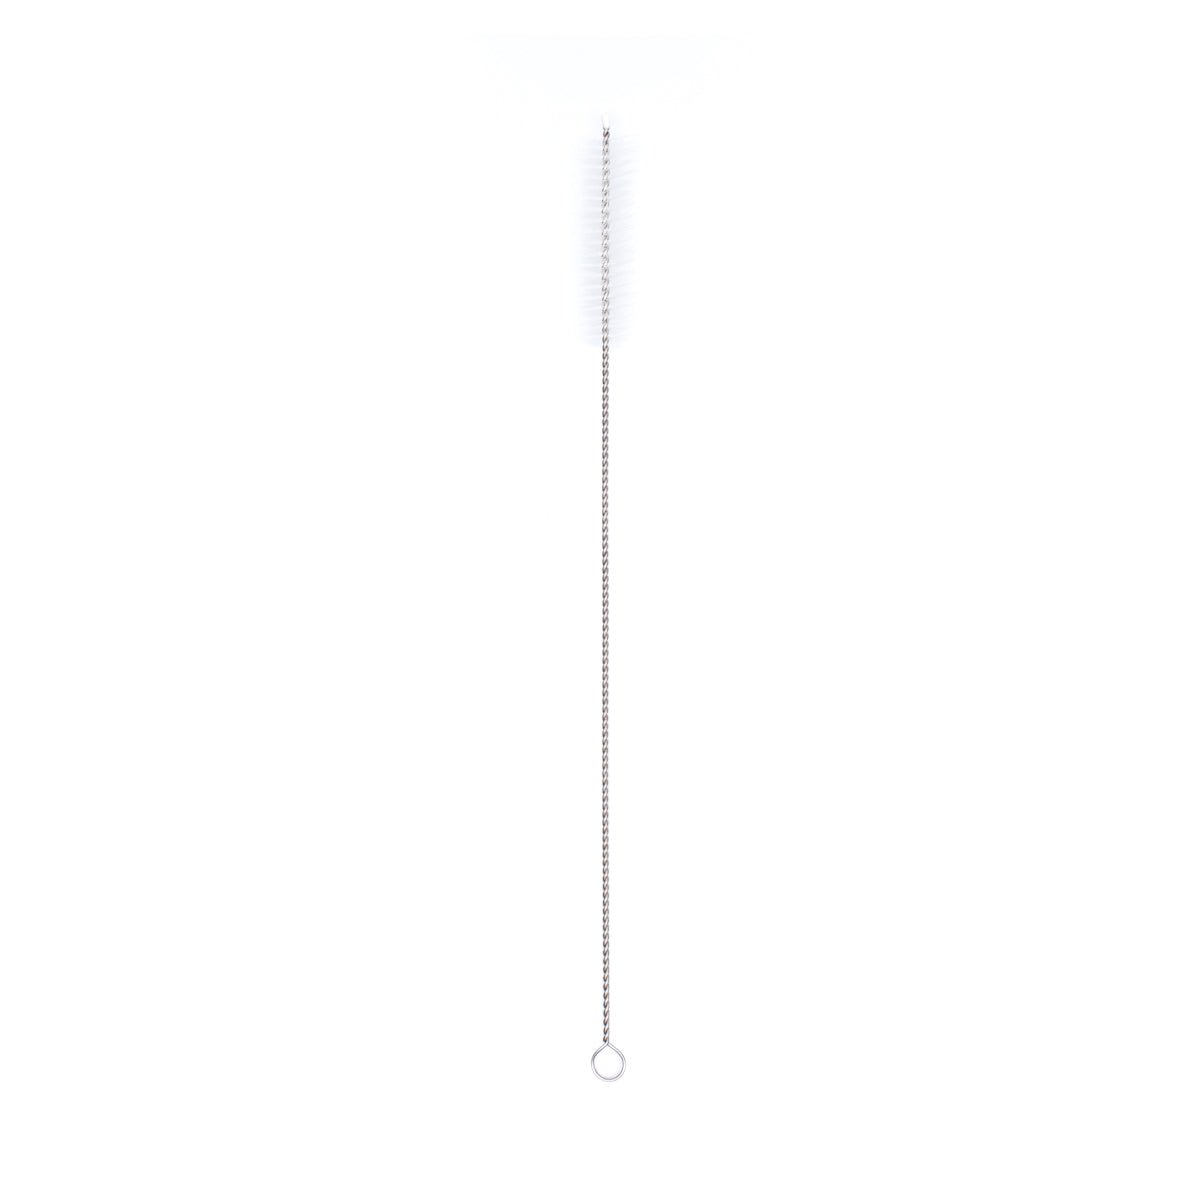 Bubble Tea Straw Cleaning Brush